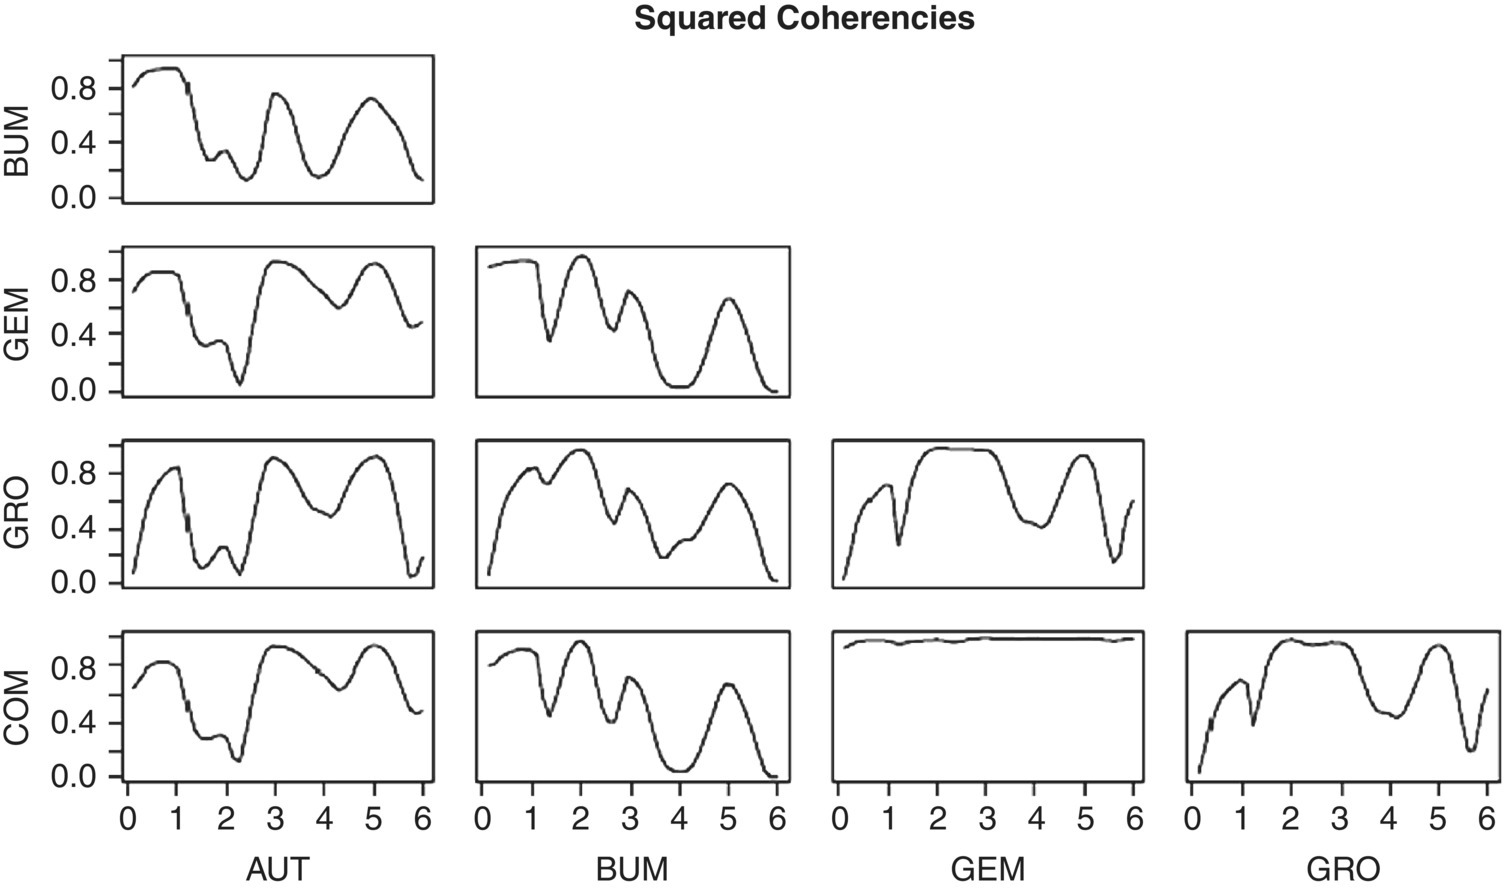 10 Graphs, each with a curve, illustrating the estimated squared coherences with the Daniell window and bandwidth of 7.